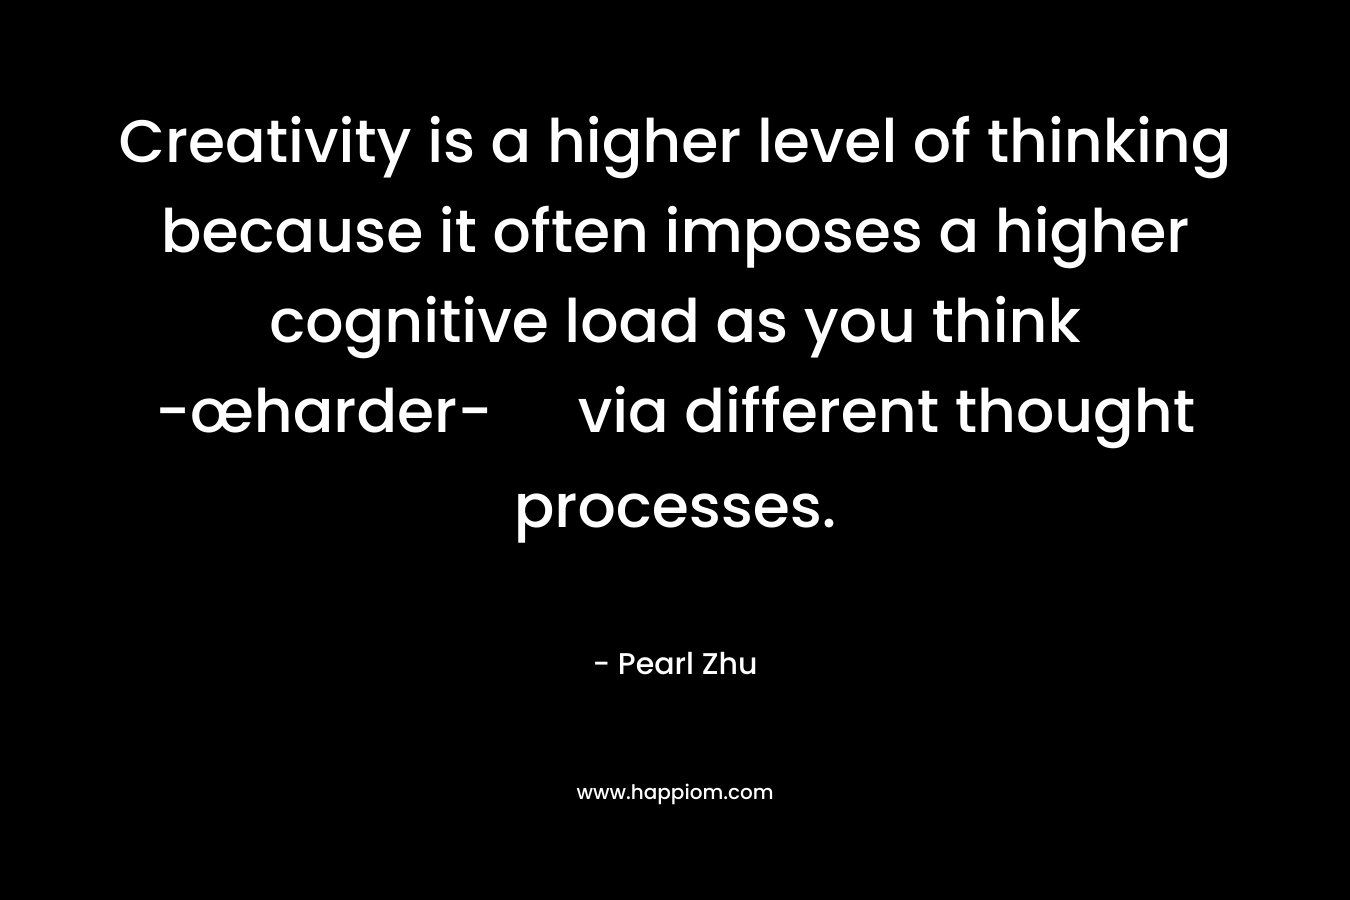 Creativity is a higher level of thinking because it often imposes a higher cognitive load as you think -œharder- via different thought processes.